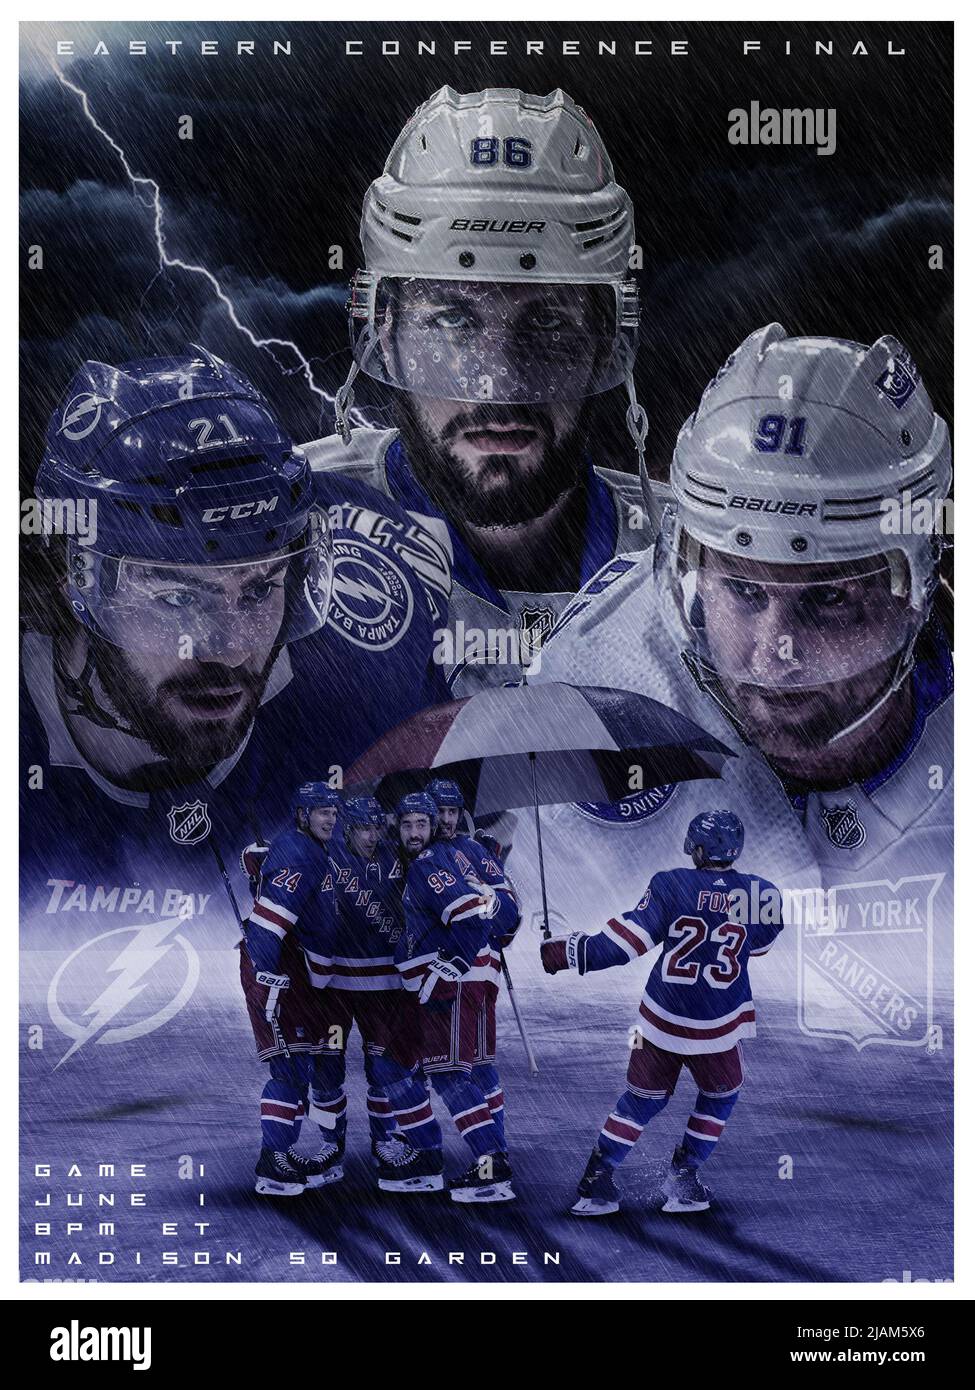 NHL Eastern Conference Final Game 1 Poster Stock Photo